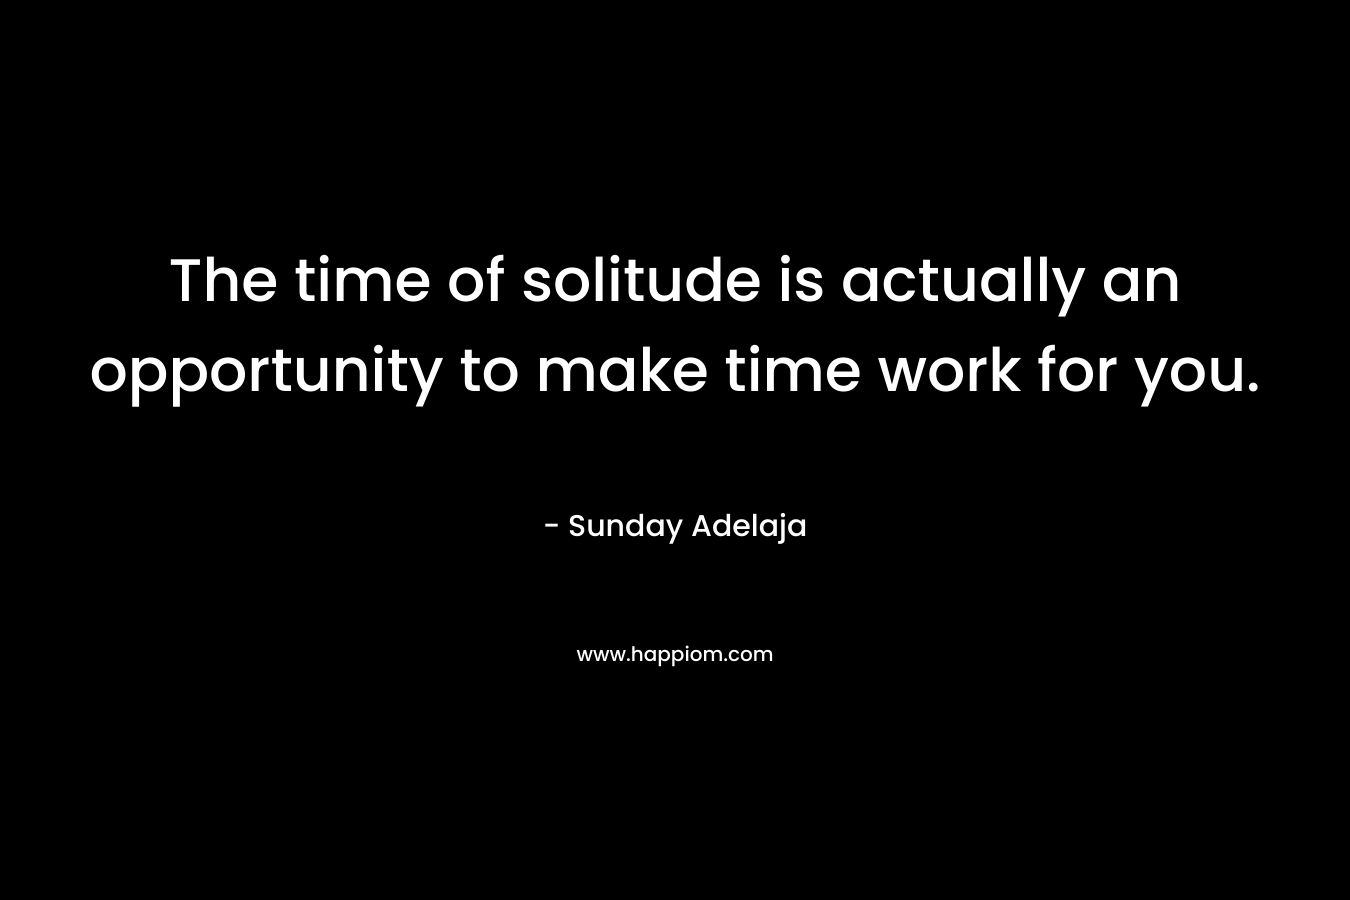 The time of solitude is actually an opportunity to make time work for you.